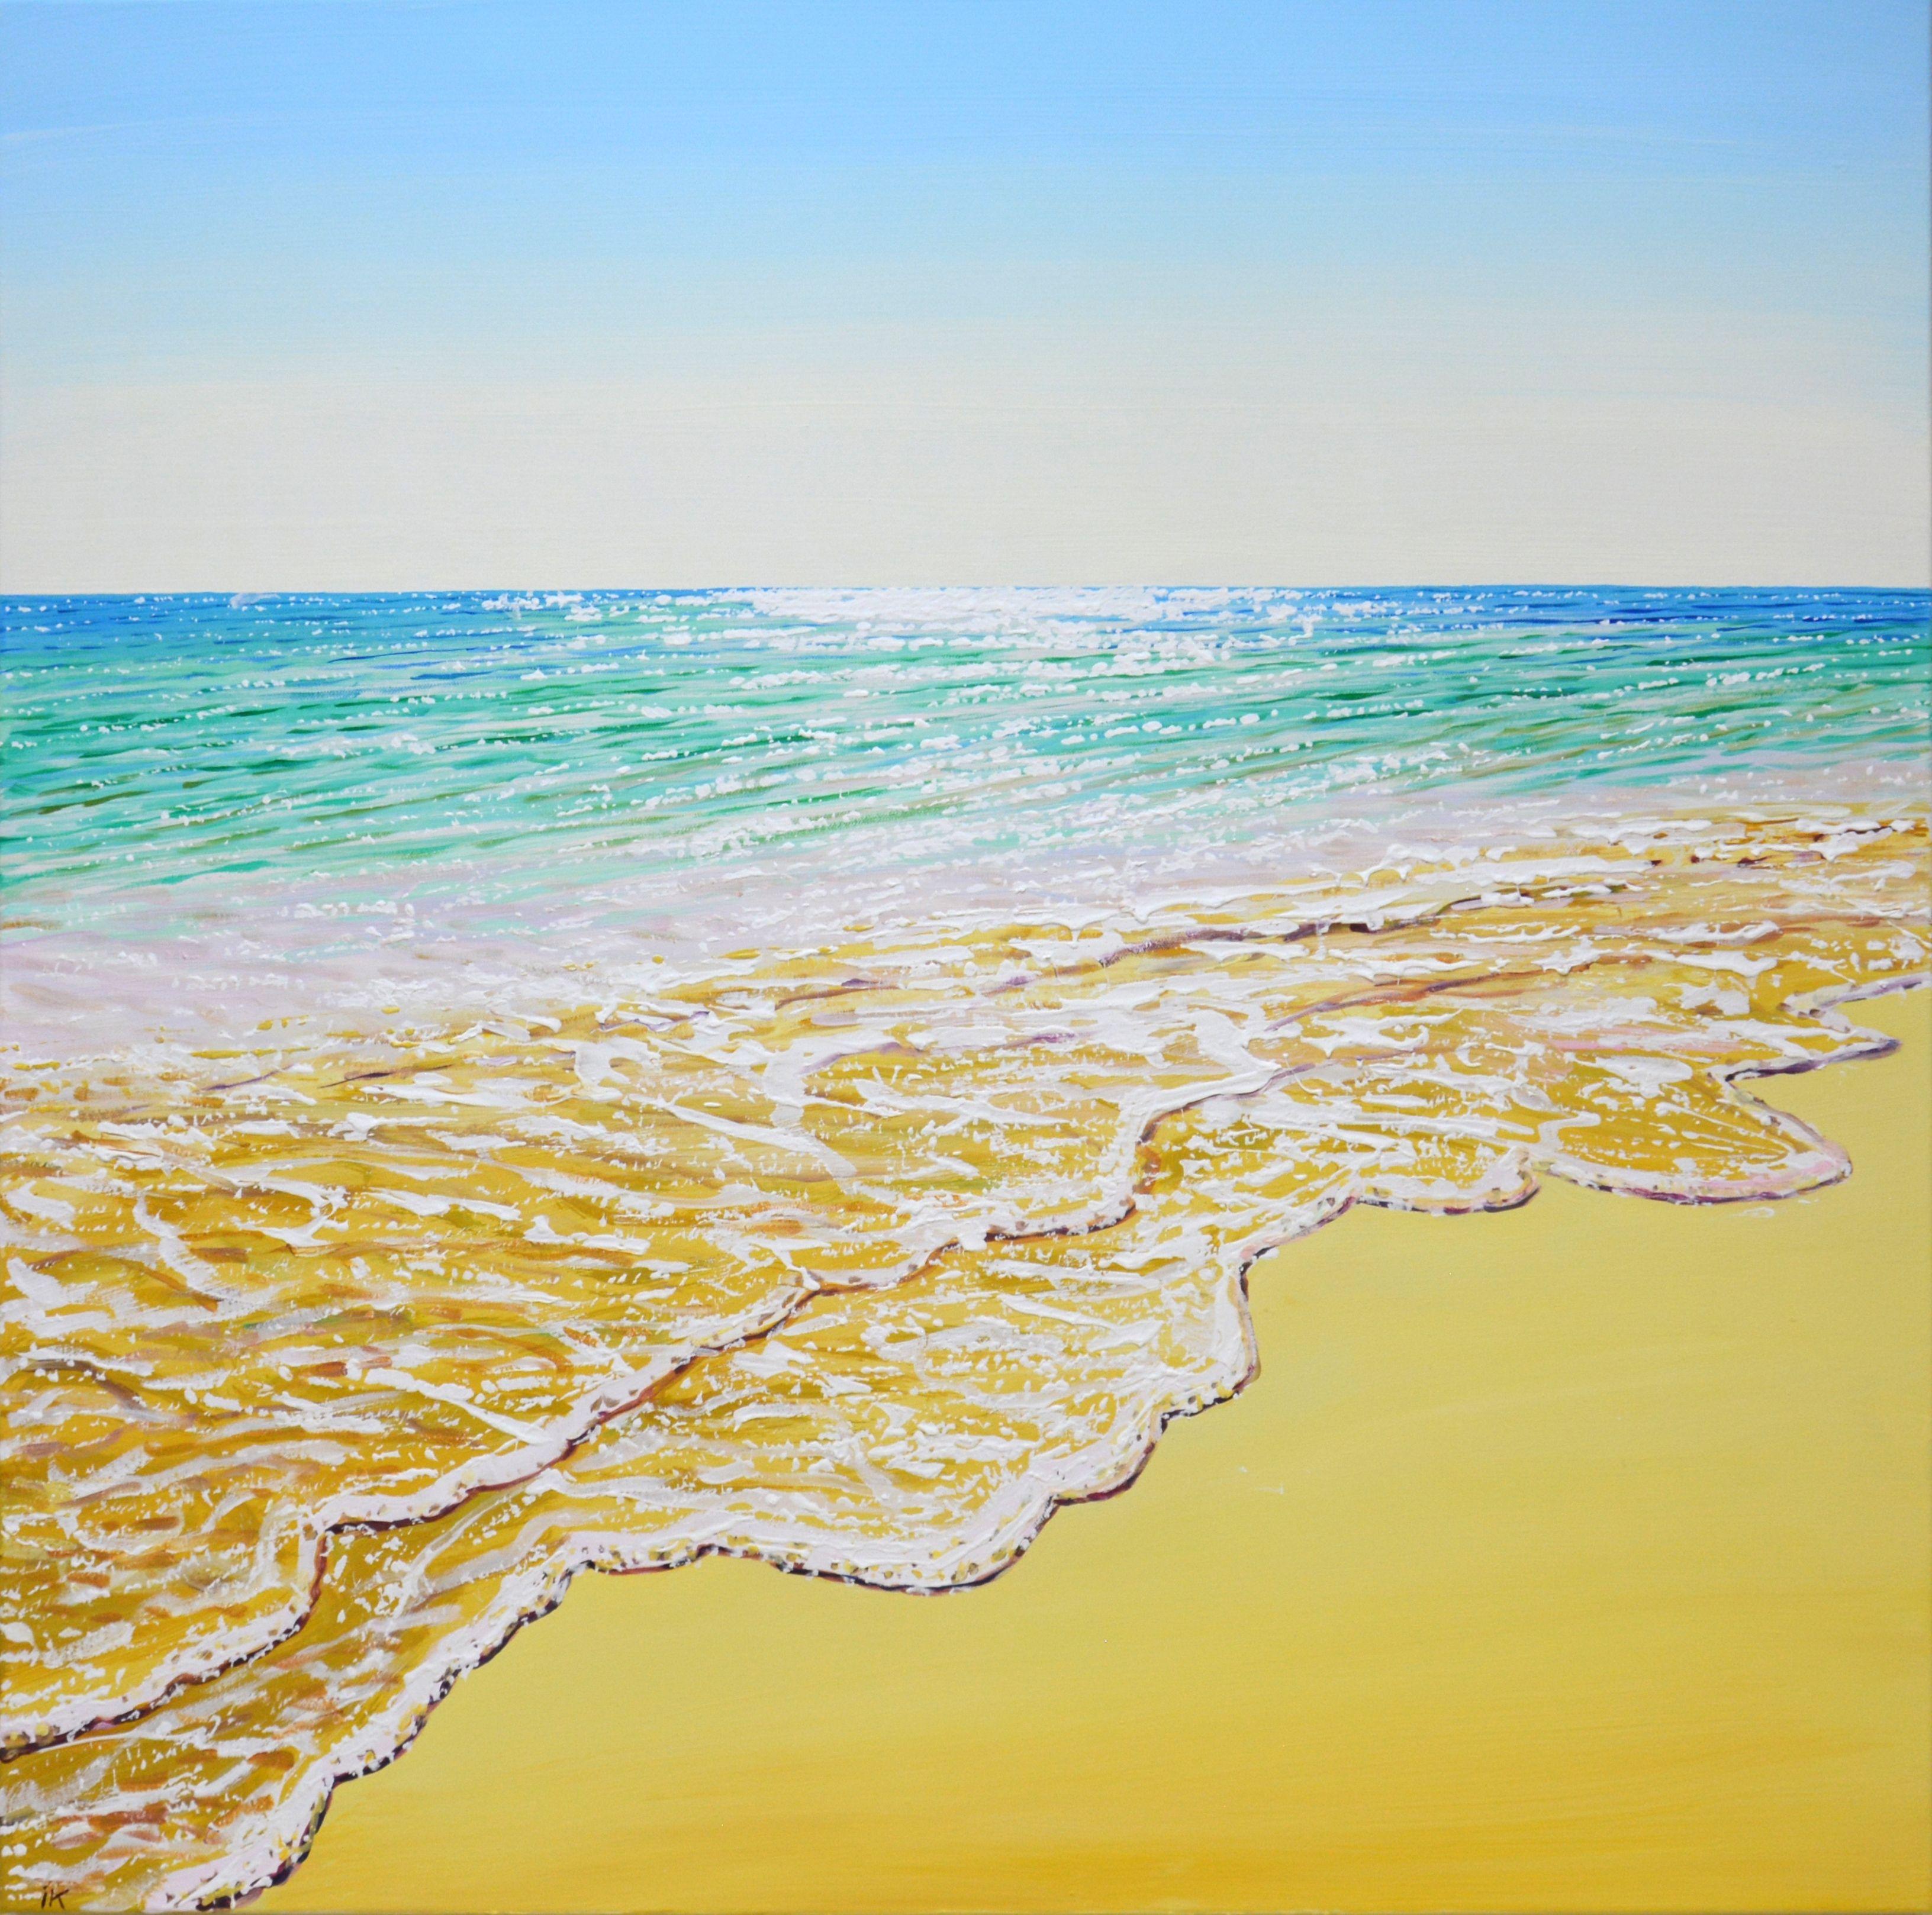 Sea. Summer. Blue water, ocean, shimmering glare of the sun on the water, sea foam, clear sky, sand, beach, small waves create an atmosphere of relaxation and romance. Made in the style of realism, the yellow, blue and white palette emphasizes the